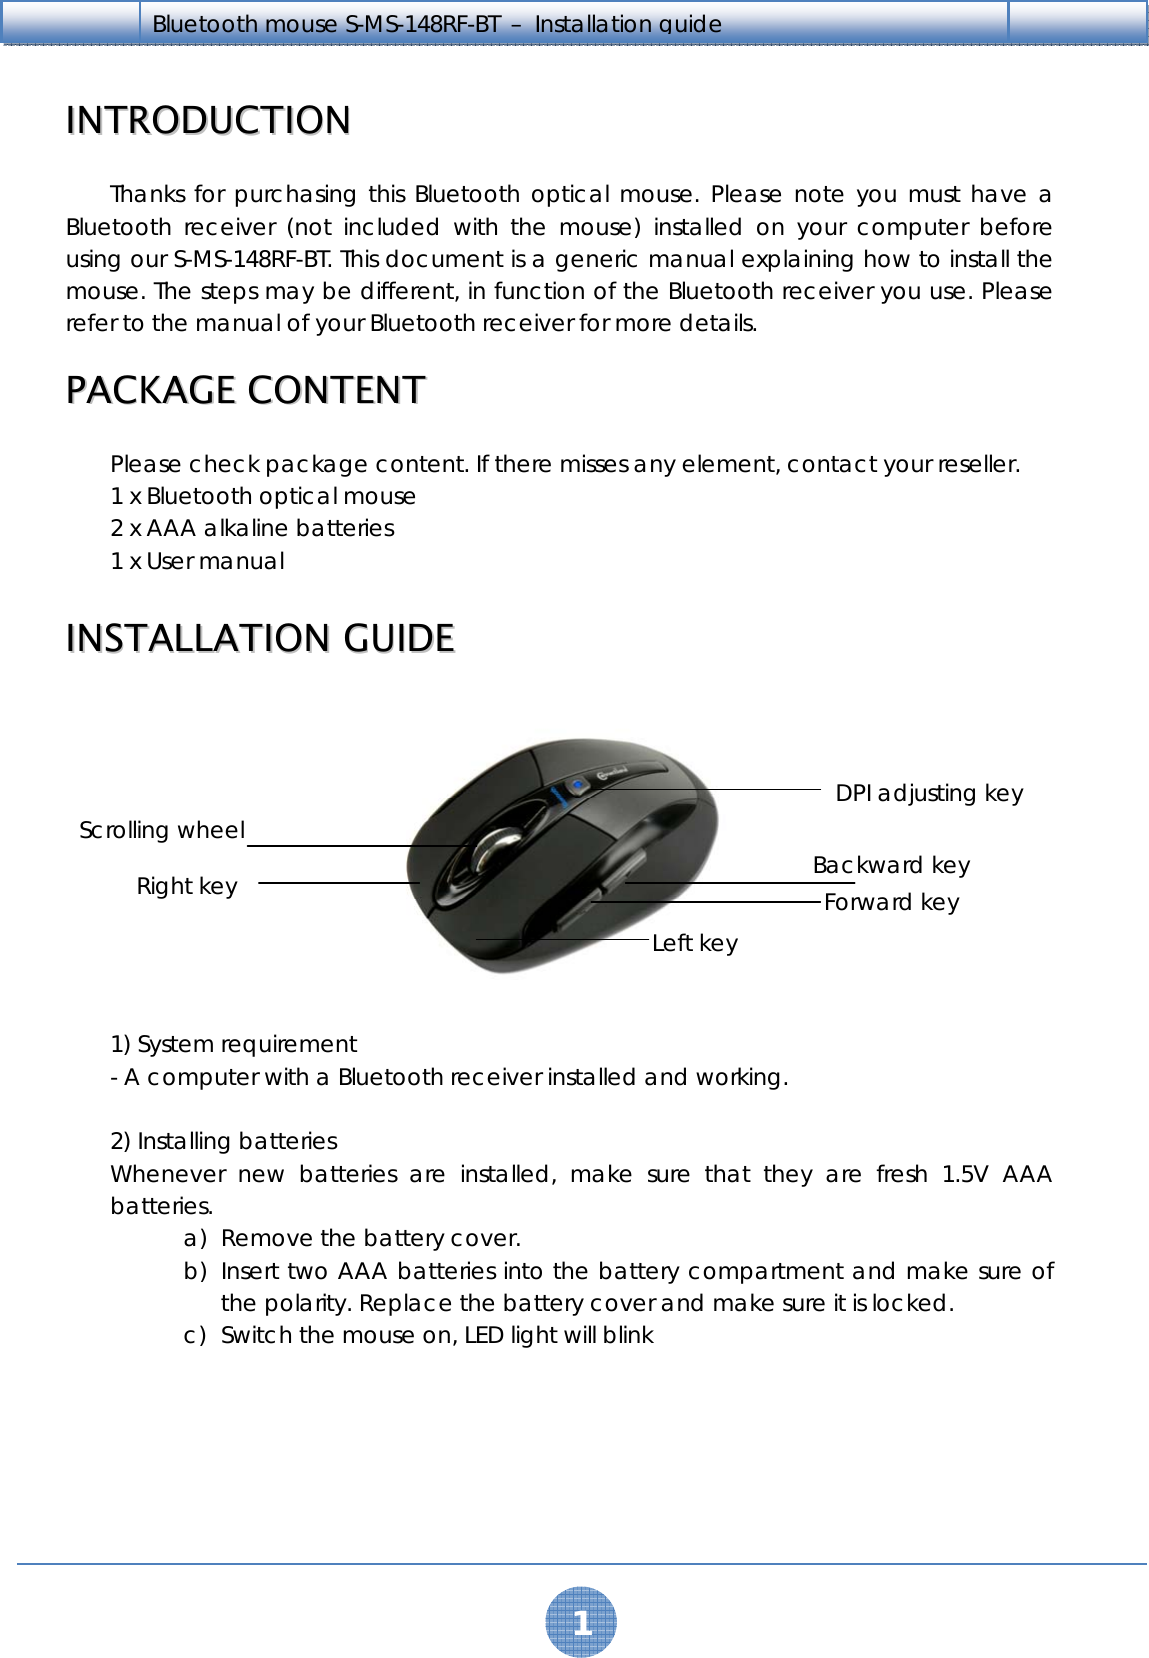   1 Bluetooth mouse S-MS-148RF-BT  –  Installation guide    IINNTTRROODDUUCCTTIIOONN    Thanks for purchasing this Bluetooth optical mouse. Please note you must have a Bluetooth receiver (not included with the mouse) installed on your computer before using our S-MS-148RF-BT. This document is a generic manual explaining how to install the mouse. The steps may be different, in function of the Bluetooth receiver you use. Please refer to the manual of your Bluetooth receiver for more details.  PPAACCKKAAGGEE  CCOONNTTEENNTT  Please check package content. If there misses any element, contact your reseller. 1 x Bluetooth optical mouse 2 x AAA alkaline batteries 1 x User manual  IINNSSTTAALLLLAATTIIOONN  GGUUIIDDEE    1) System requirement - A computer with a Bluetooth receiver installed and working.  2) Installing batteries Whenever new batteries are installed, make sure that they are fresh 1.5V AAA batteries.  a) Remove the battery cover. b) Insert two AAA batteries into the battery compartment and make sure of the polarity. Replace the battery cover and make sure it is locked. c) Switch the mouse on, LED light will blink DPI adjusting key Backward key Forward key Left key Scrolling wheel Right key 